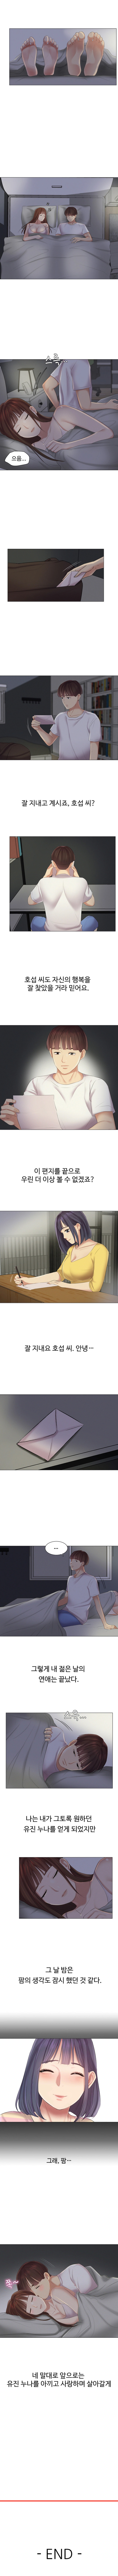 Accountancy Raw - Chapter 20 Page 6